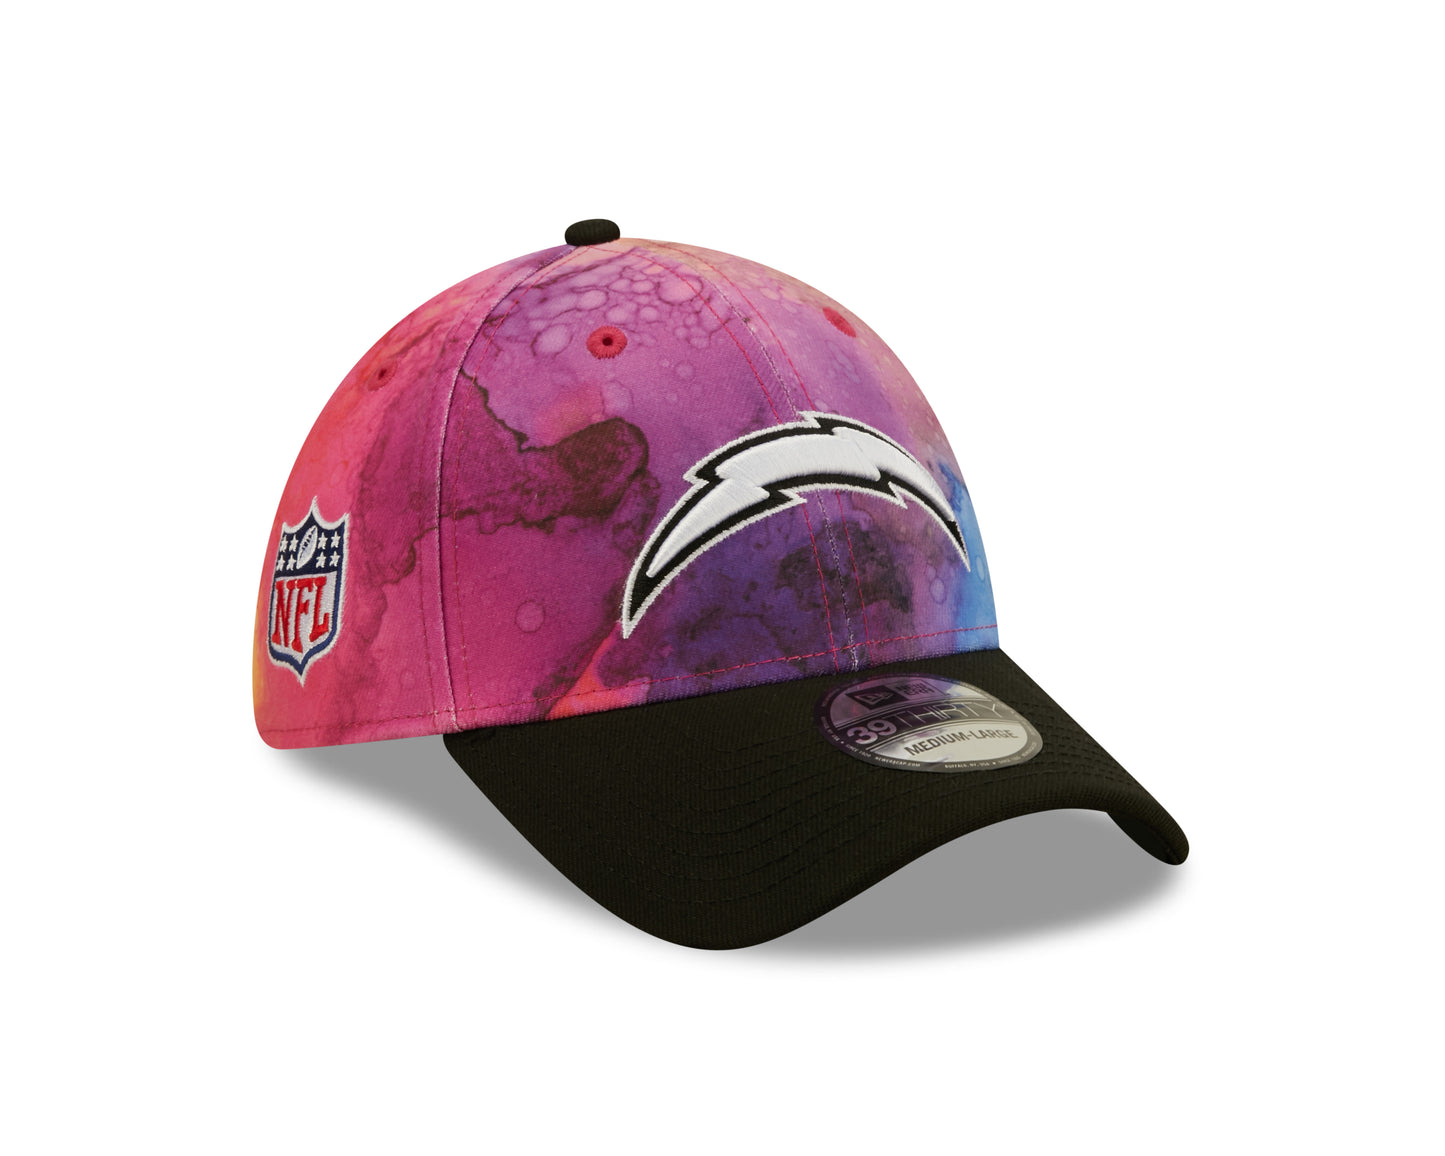 Los Angeles Chargers Era New Era Sideline Crucial Catch 39Thirty Hat- Pink